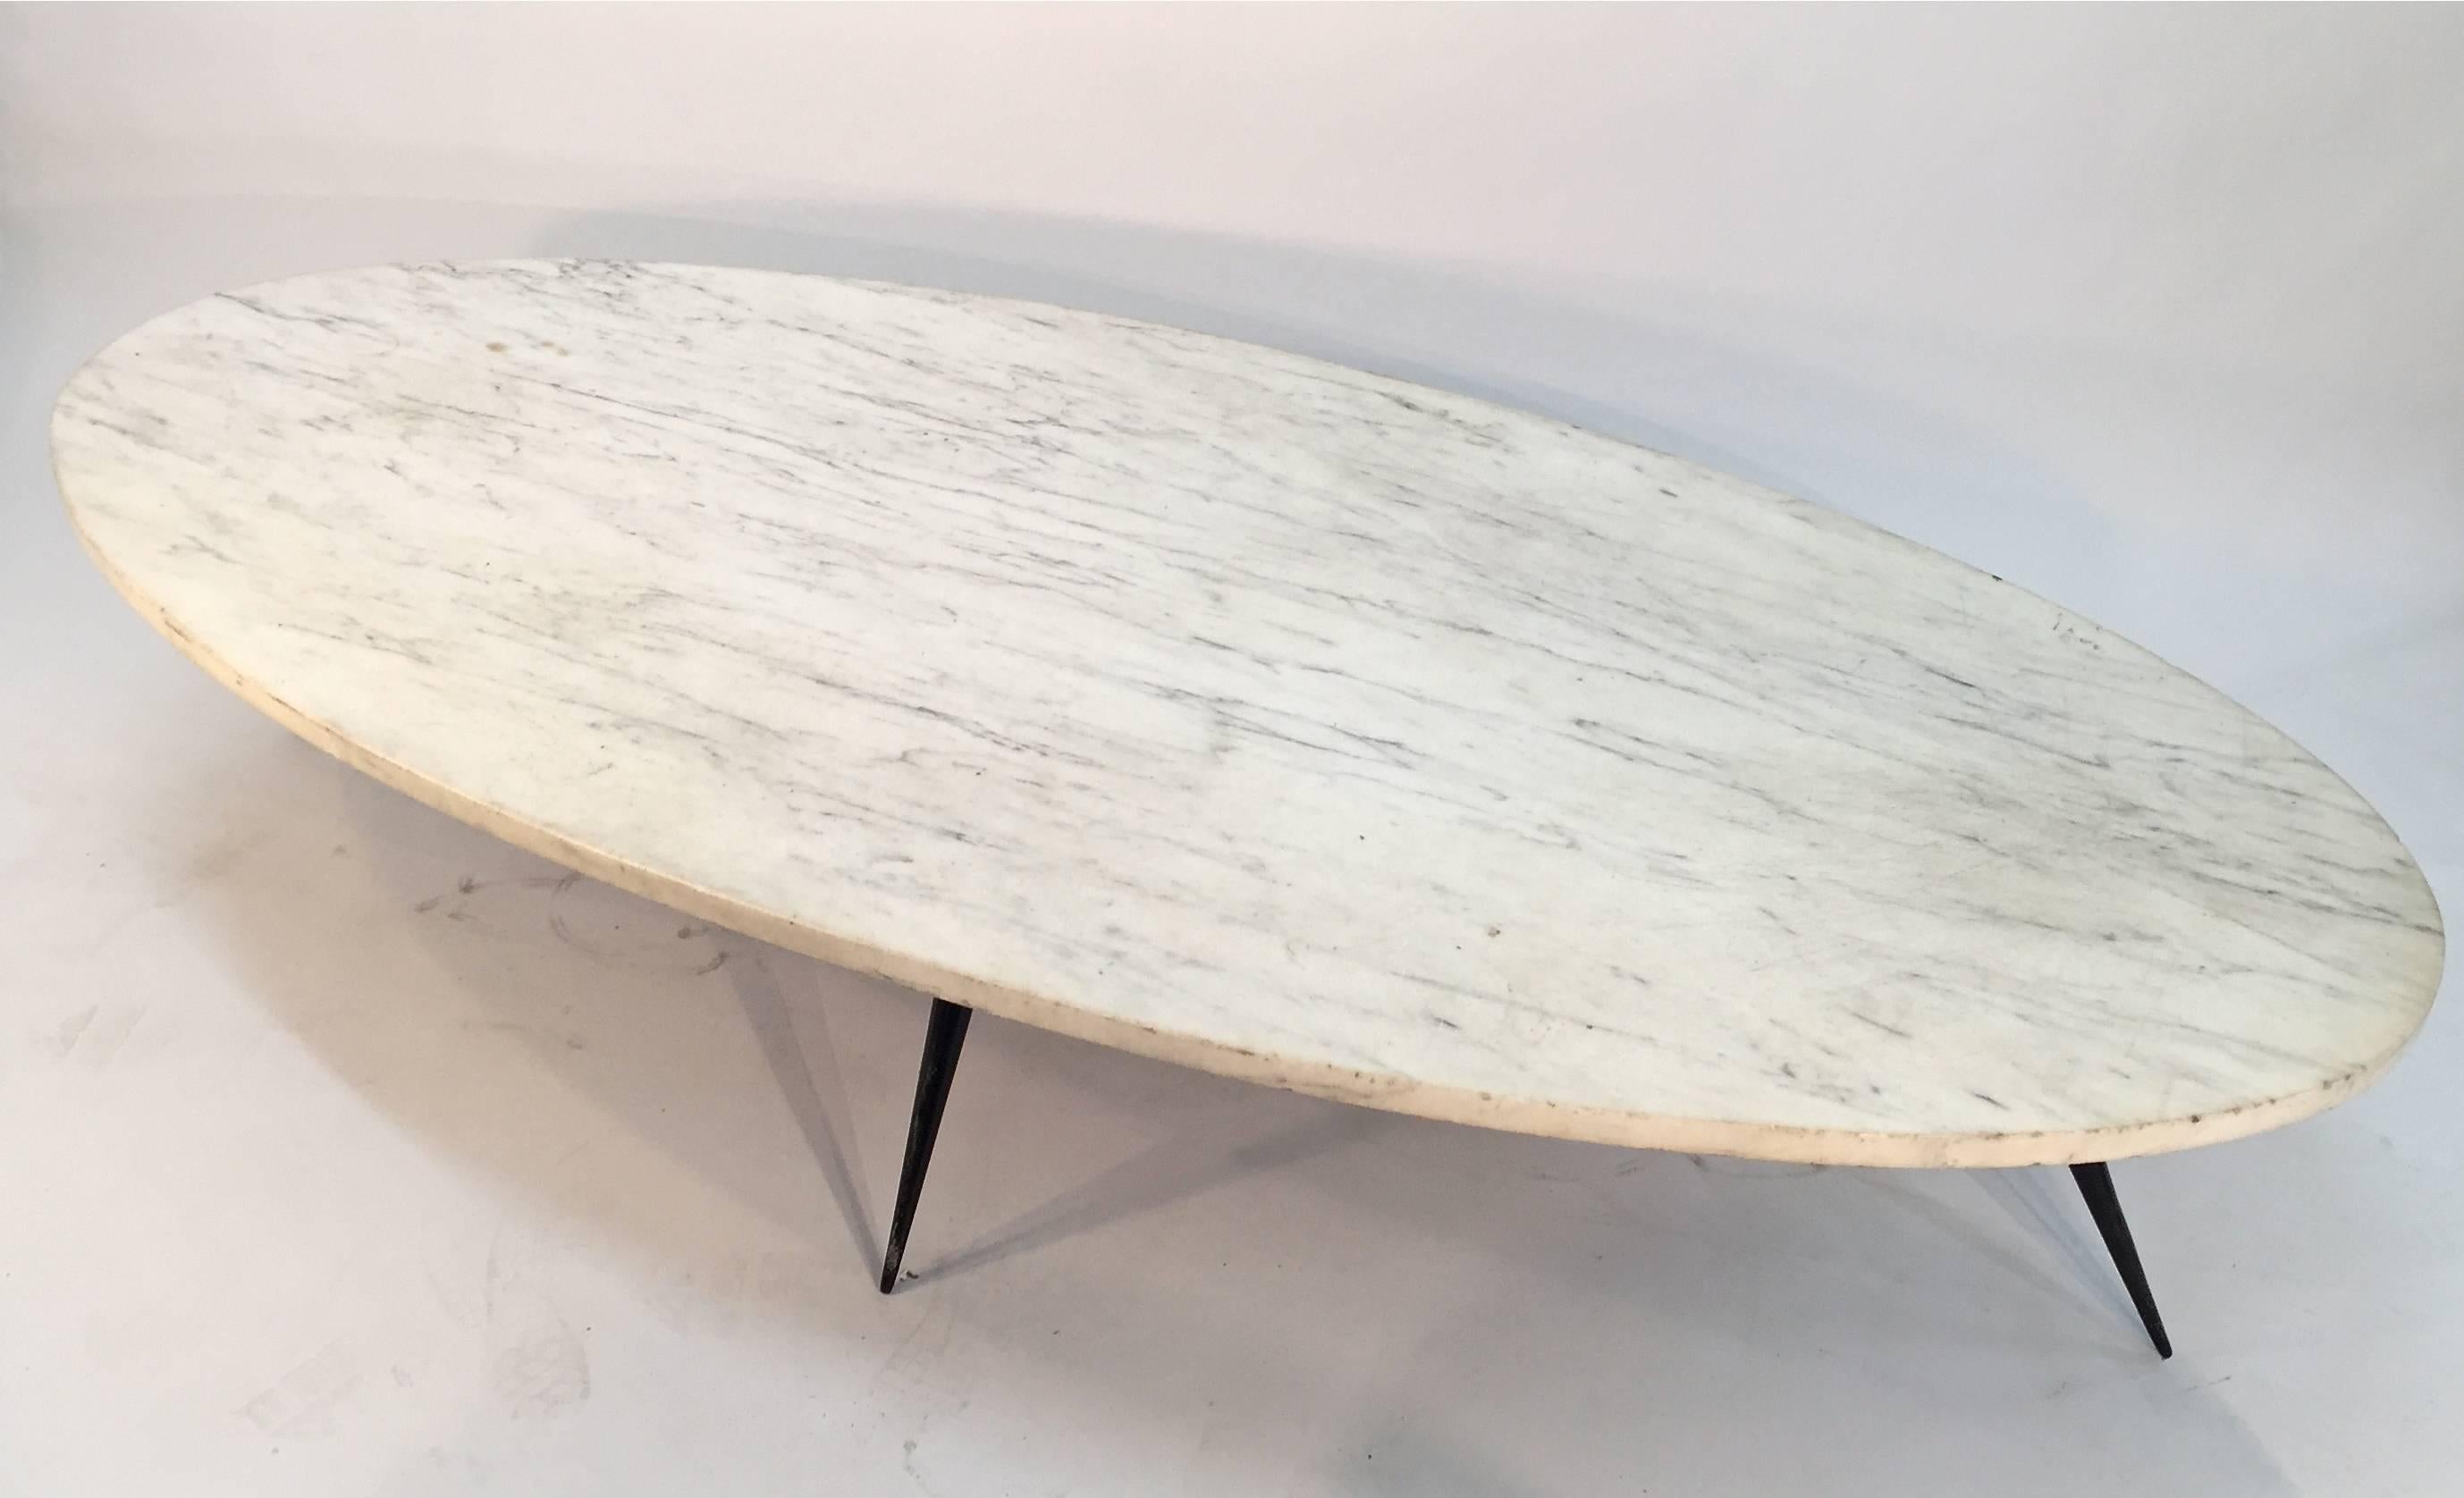 Marble-top coffee table with sculptural metal legs, 1950s.